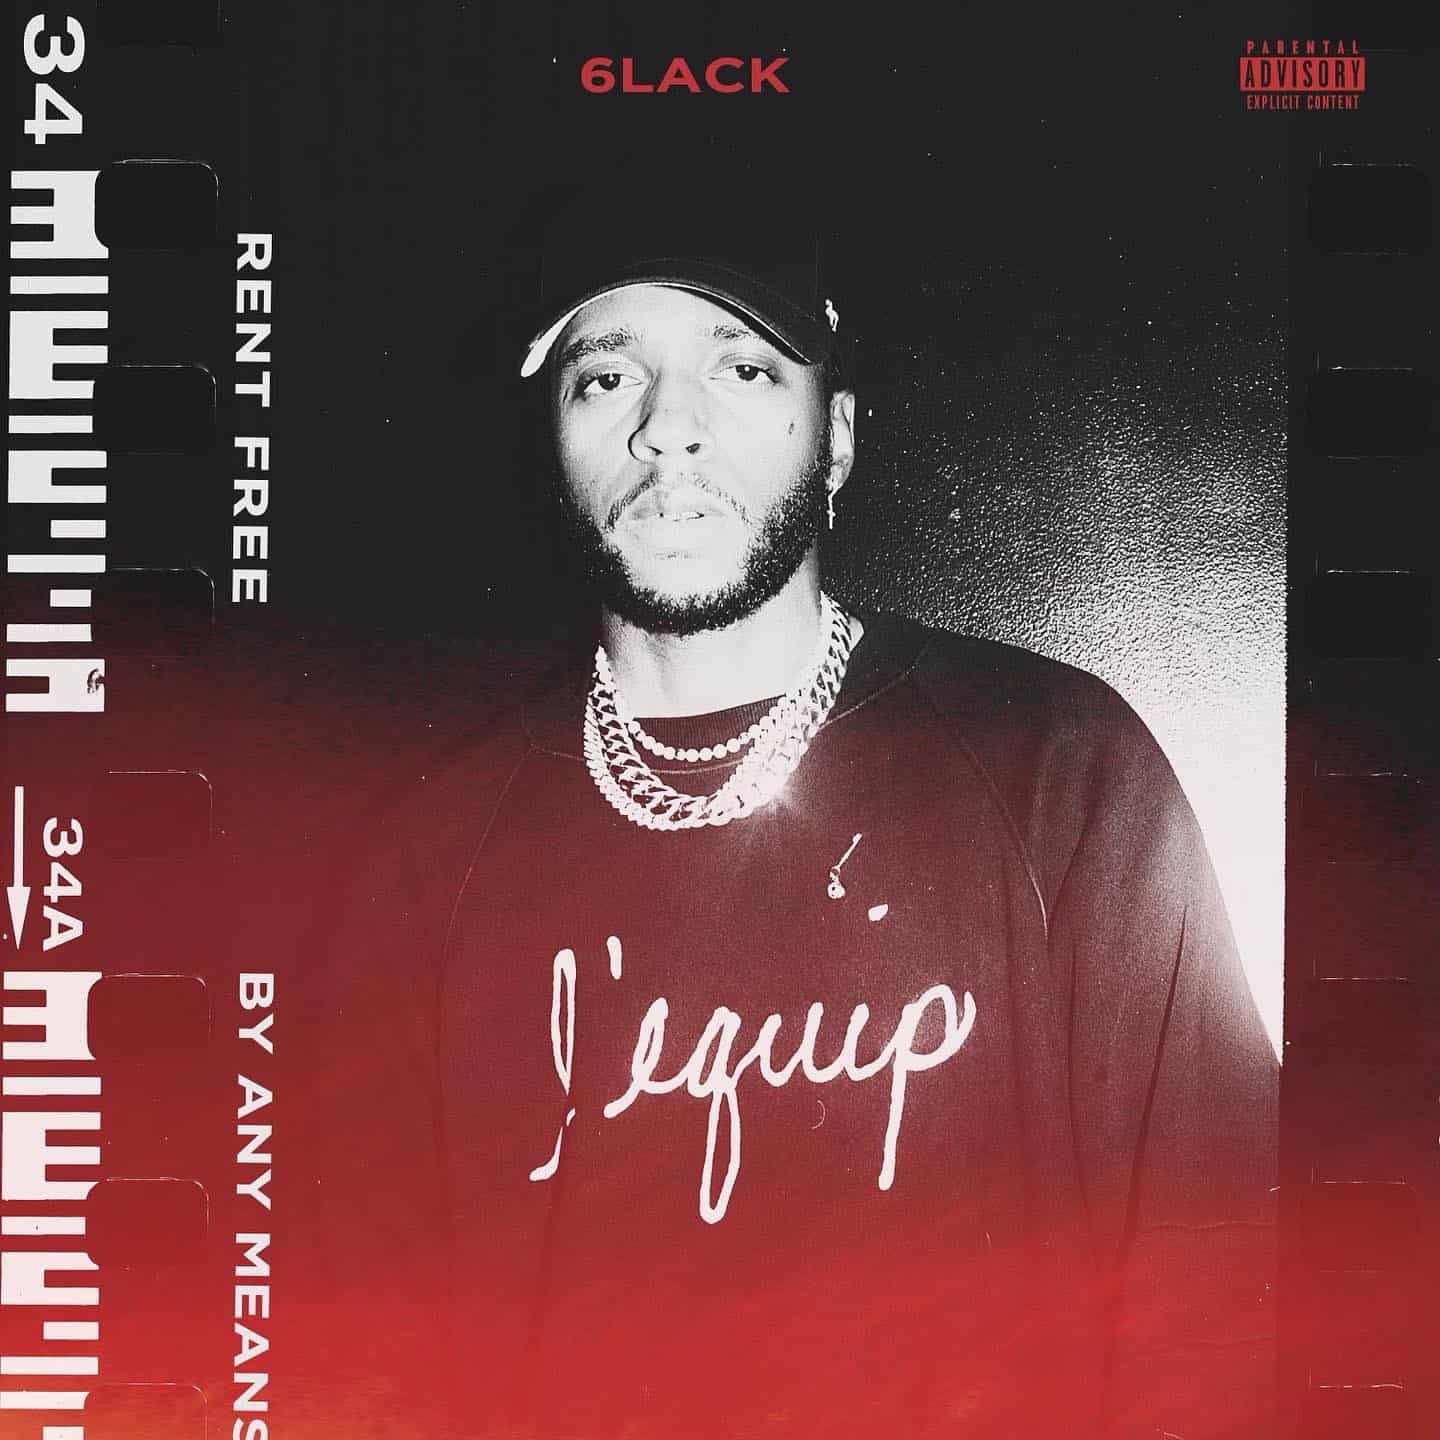 6LACK Returns With Two New Songs Rent Free & By Any Means